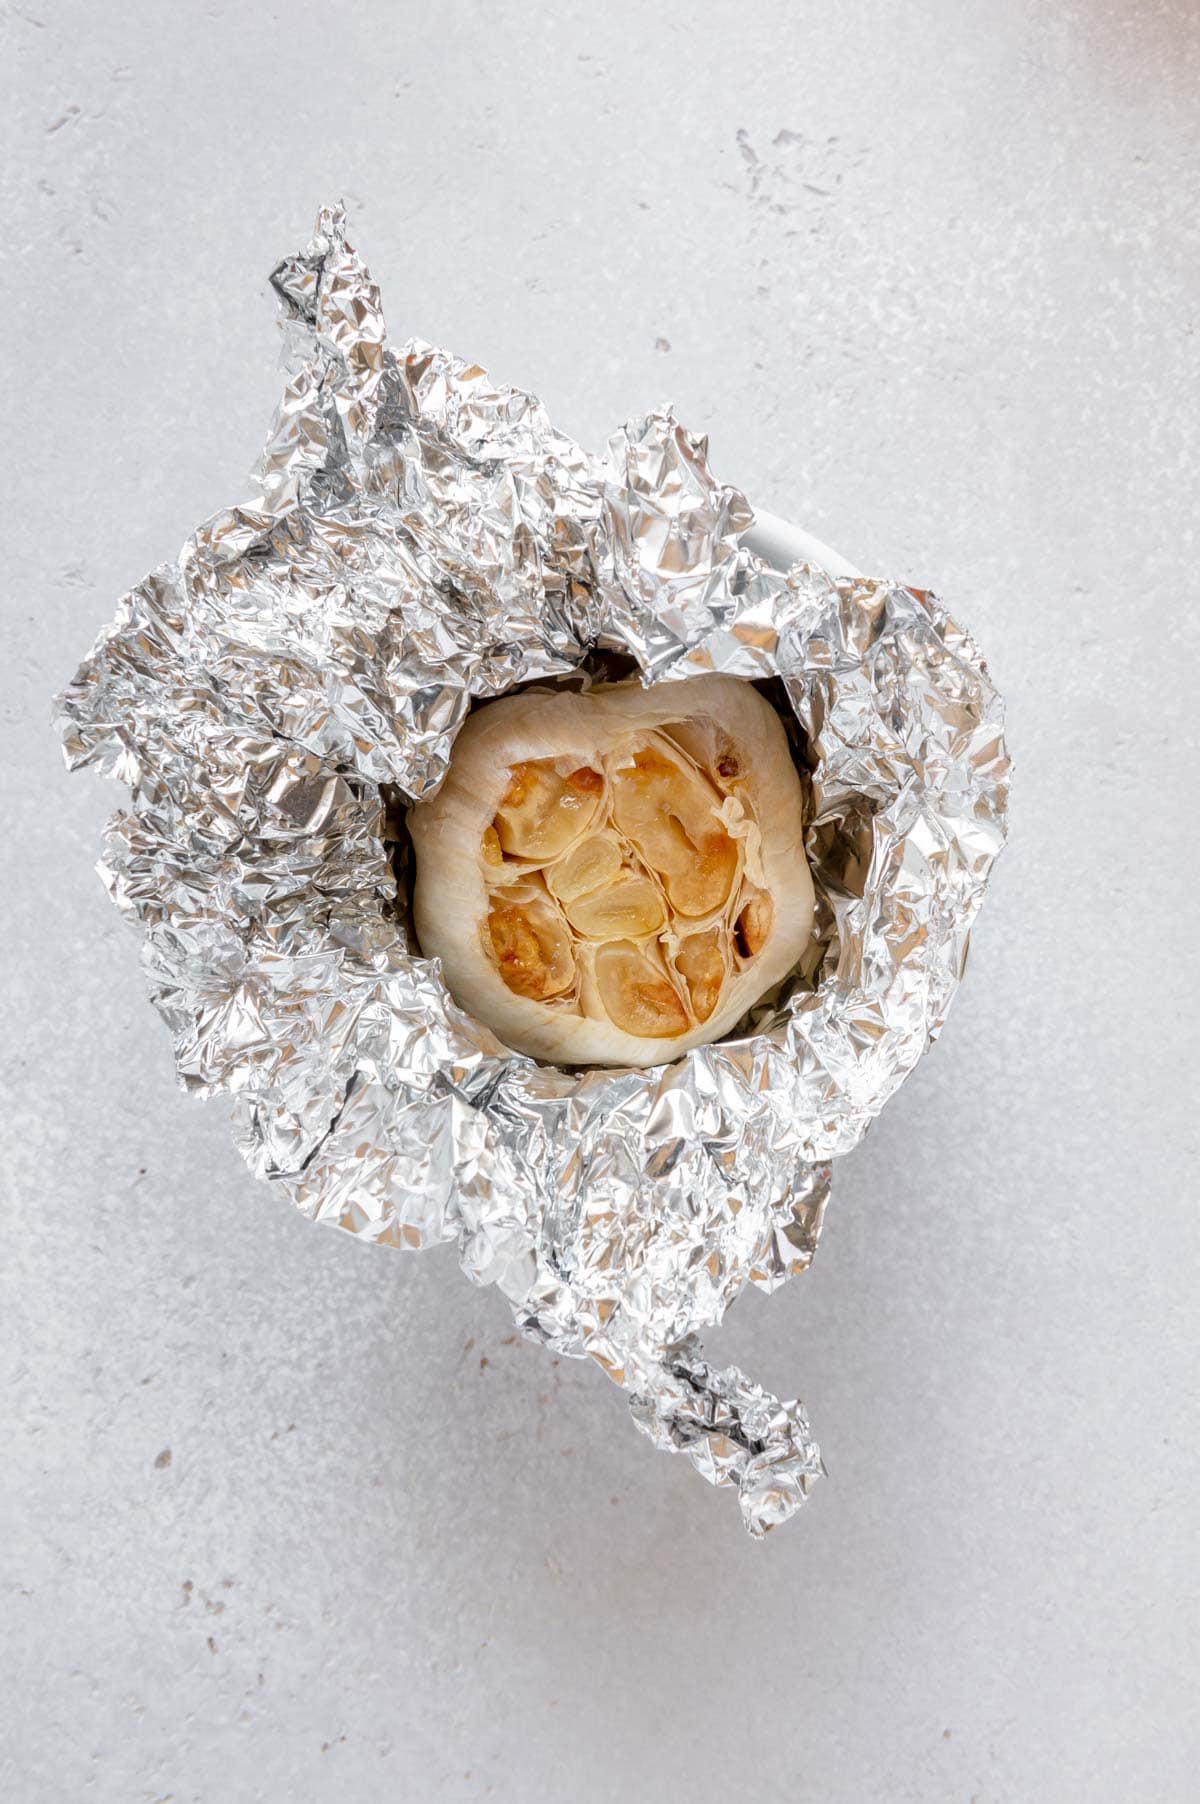 Finished roasted garlic in foil.